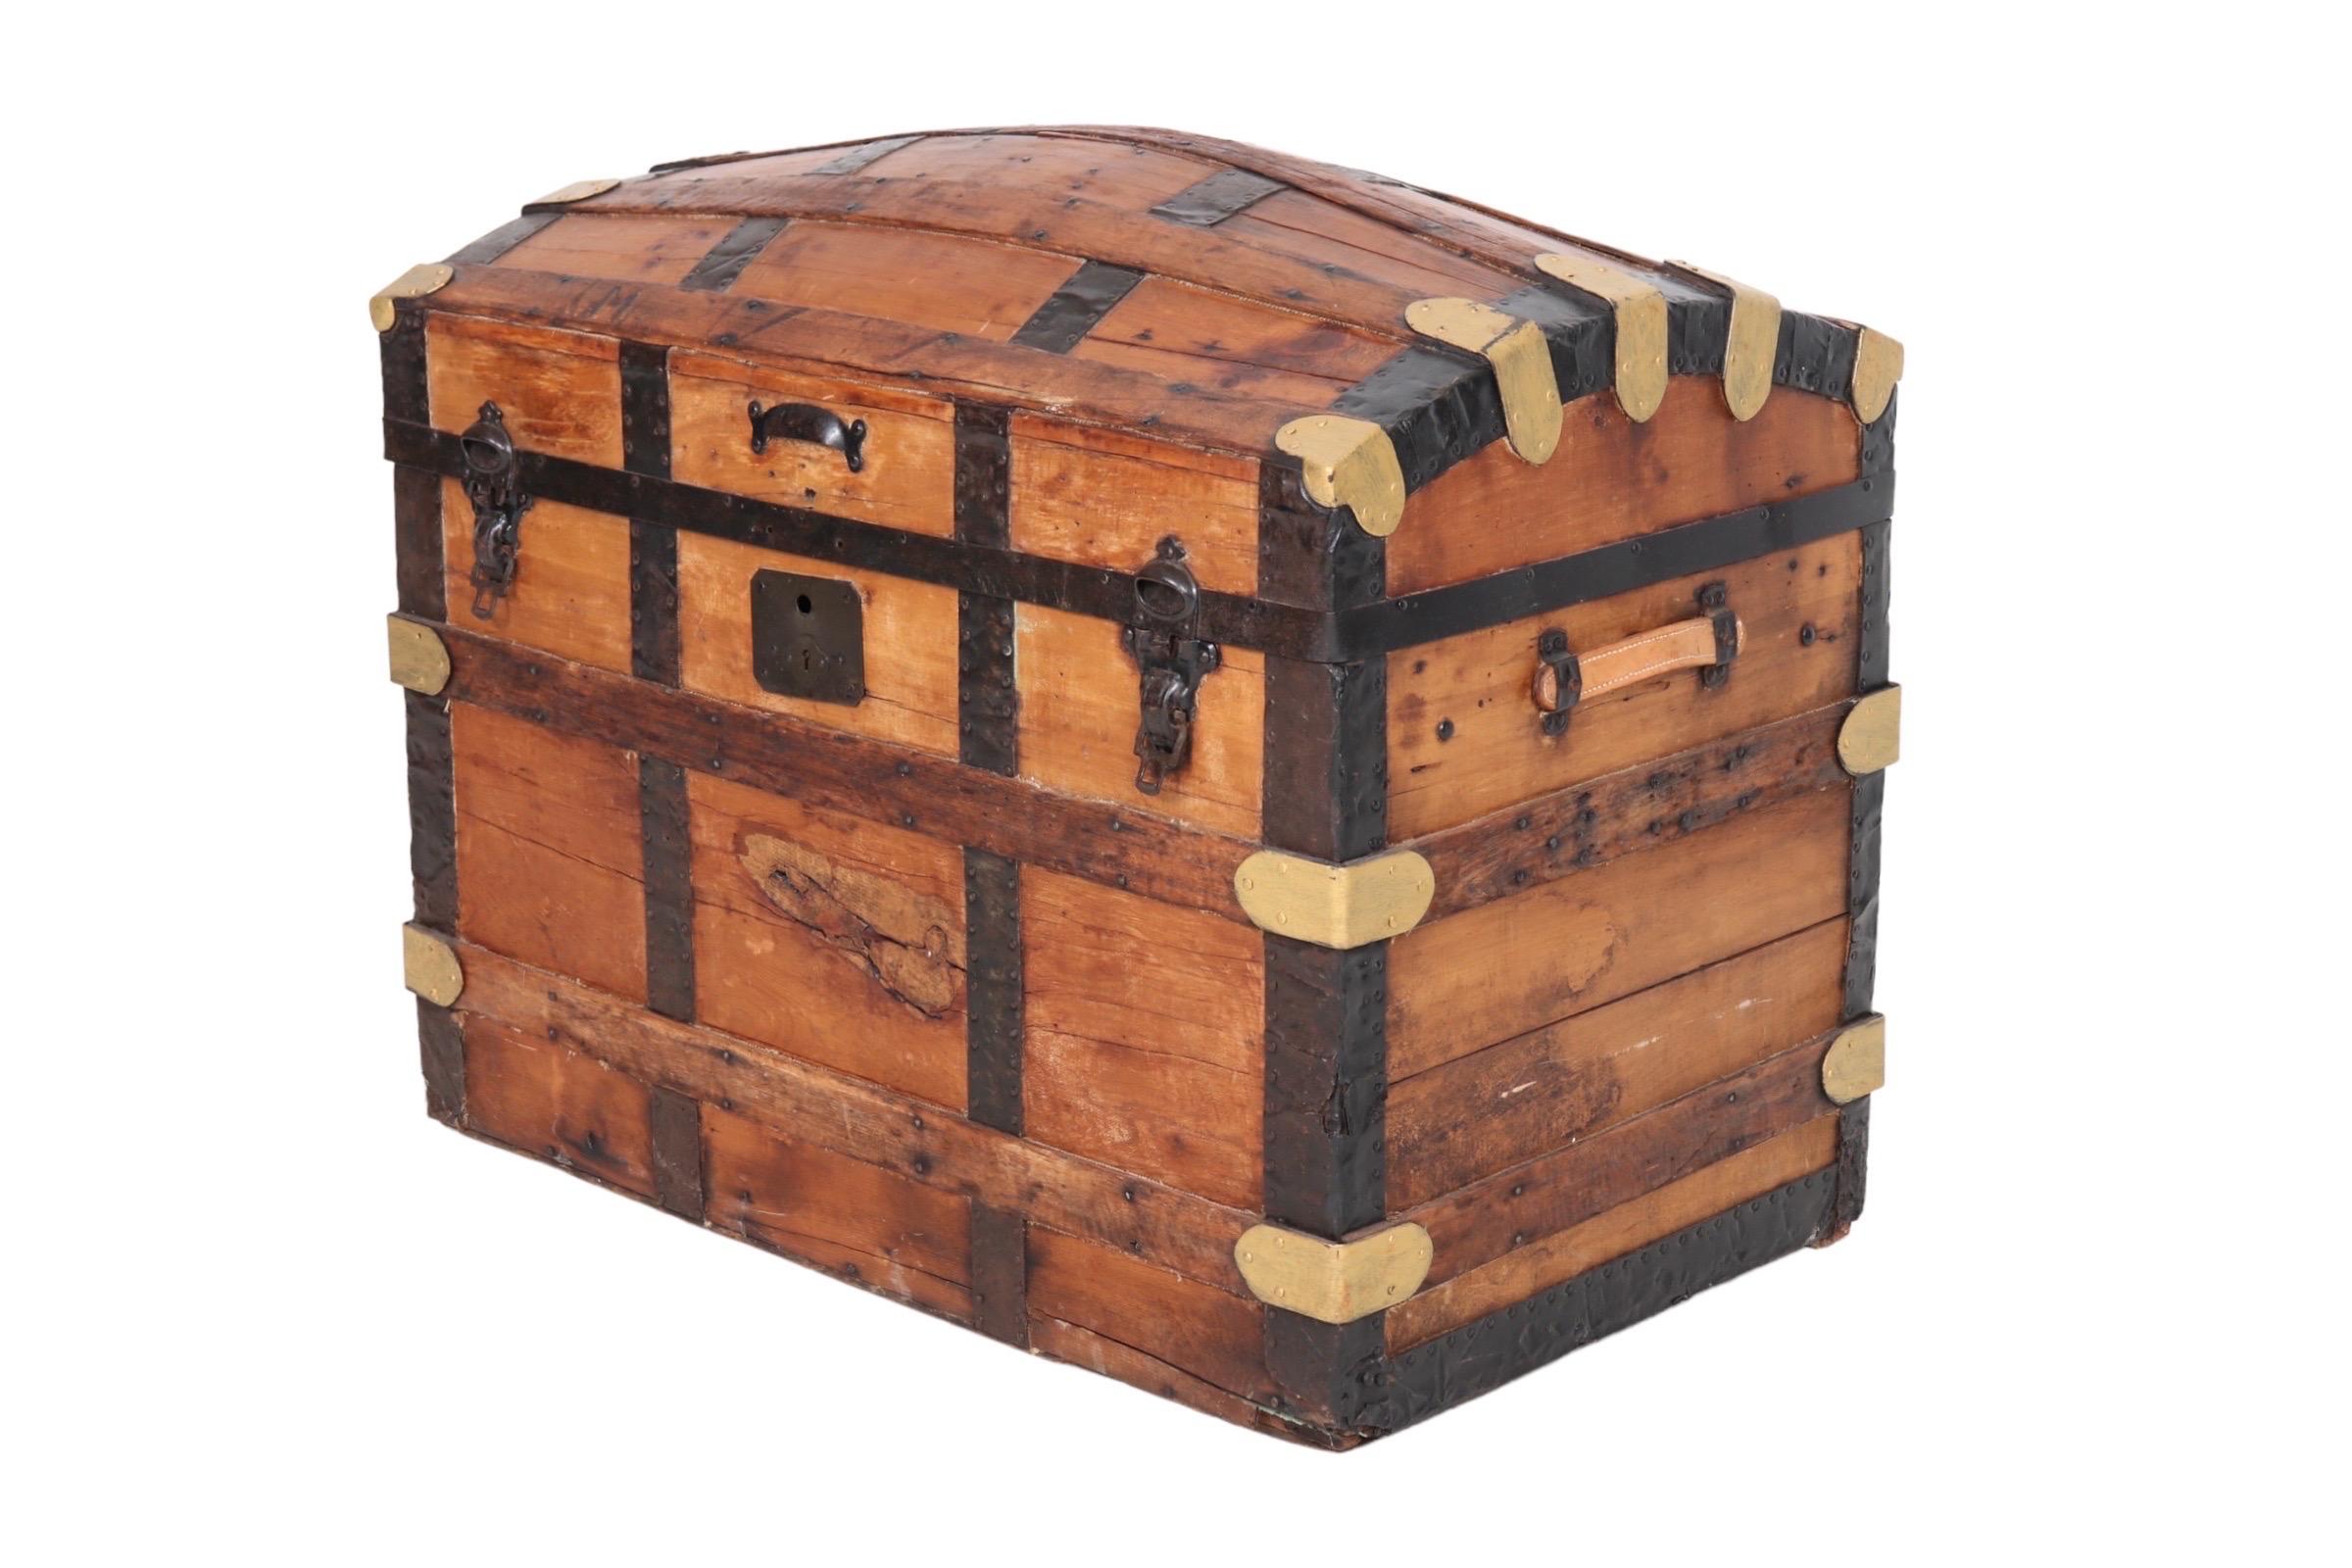 An antique barrel-stave steamer trunk dating from the mid 19th century. Made of oak, it has a domed lid with gold painted brass corners, black leather strapping and original iron hinges. Each end has a leather carrying handle and the interior is